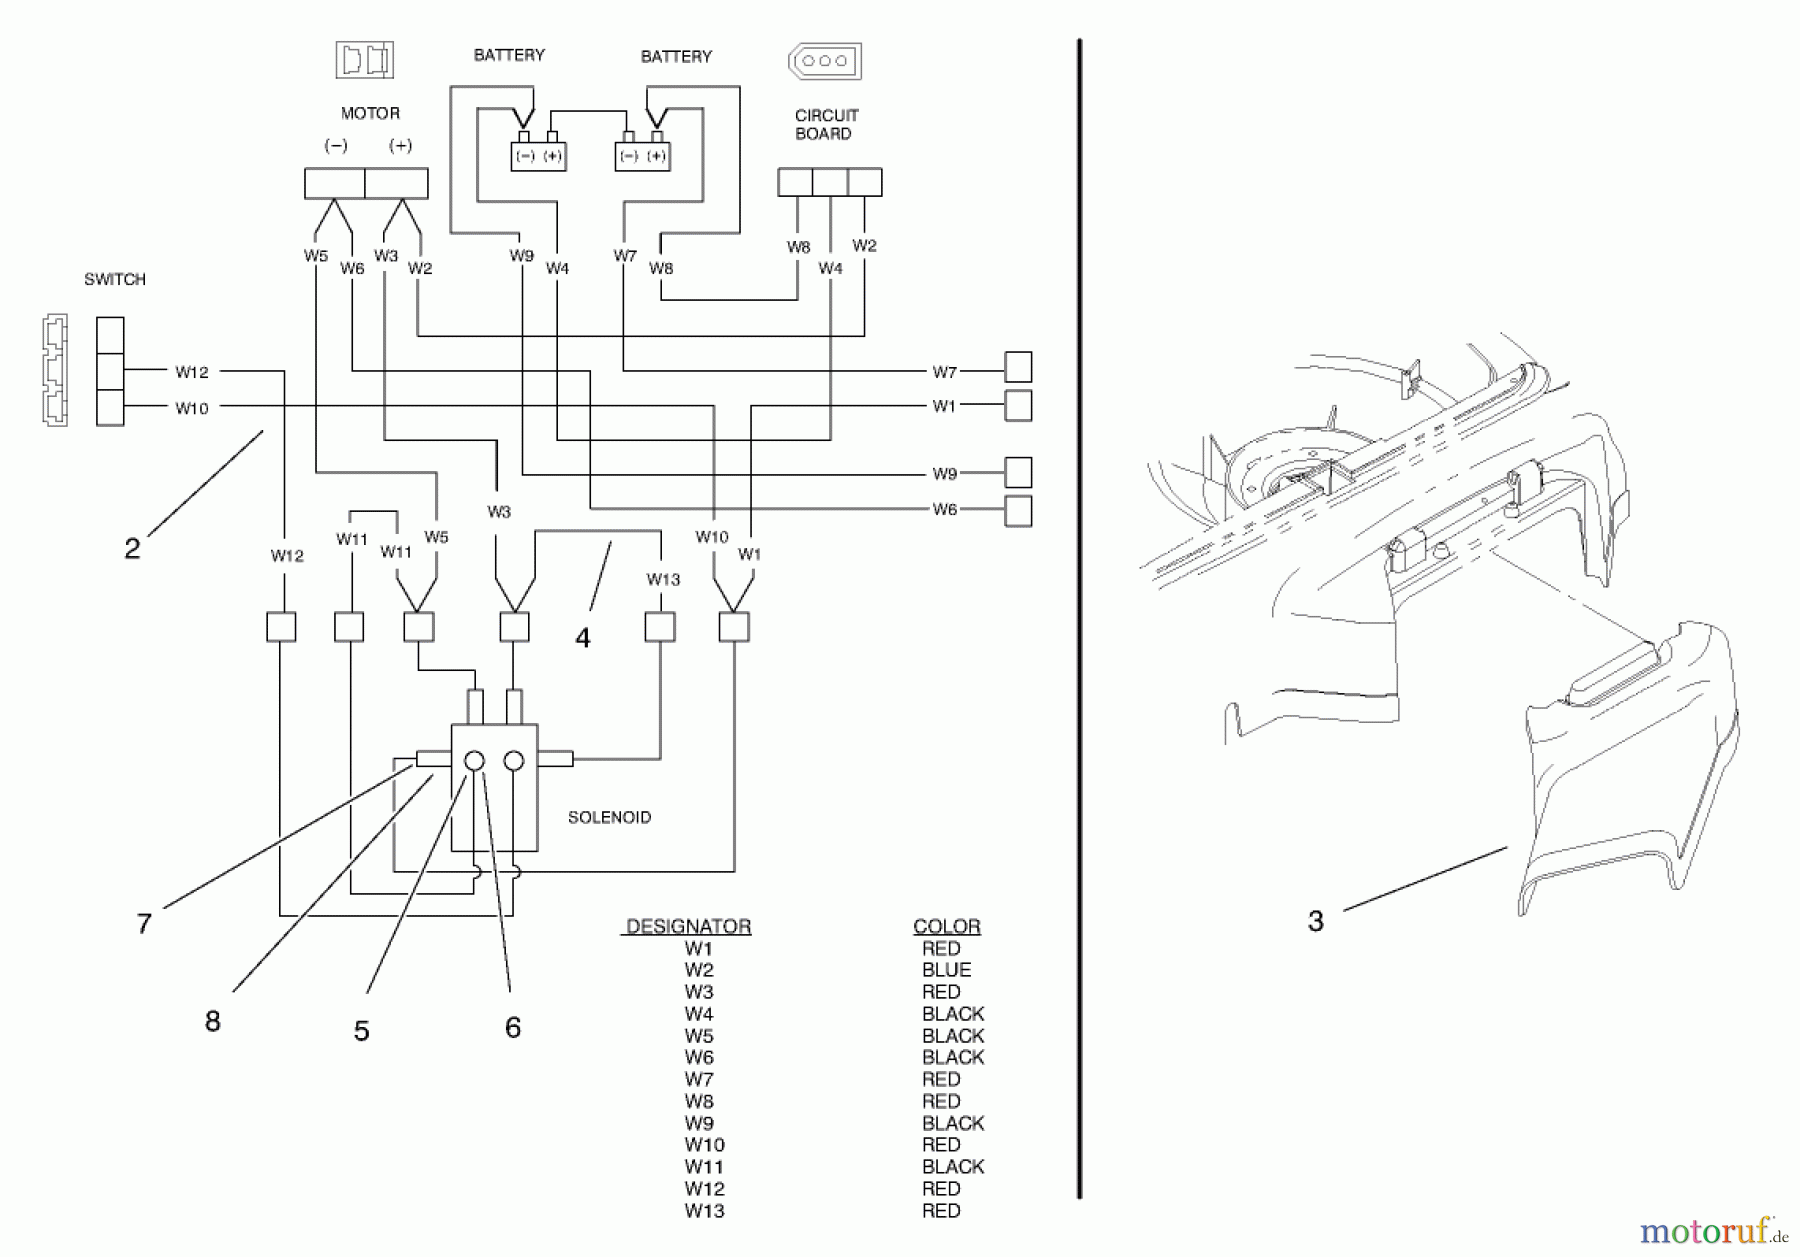  Toro Neu Mowers, Electric 20650 - Toro Carefree Recycler Electric Mower, E36, 1999 (99000001-99999999) ELECTRICAL WIRING DIAGRAM AND SIDE DISCHARGE CHUTE